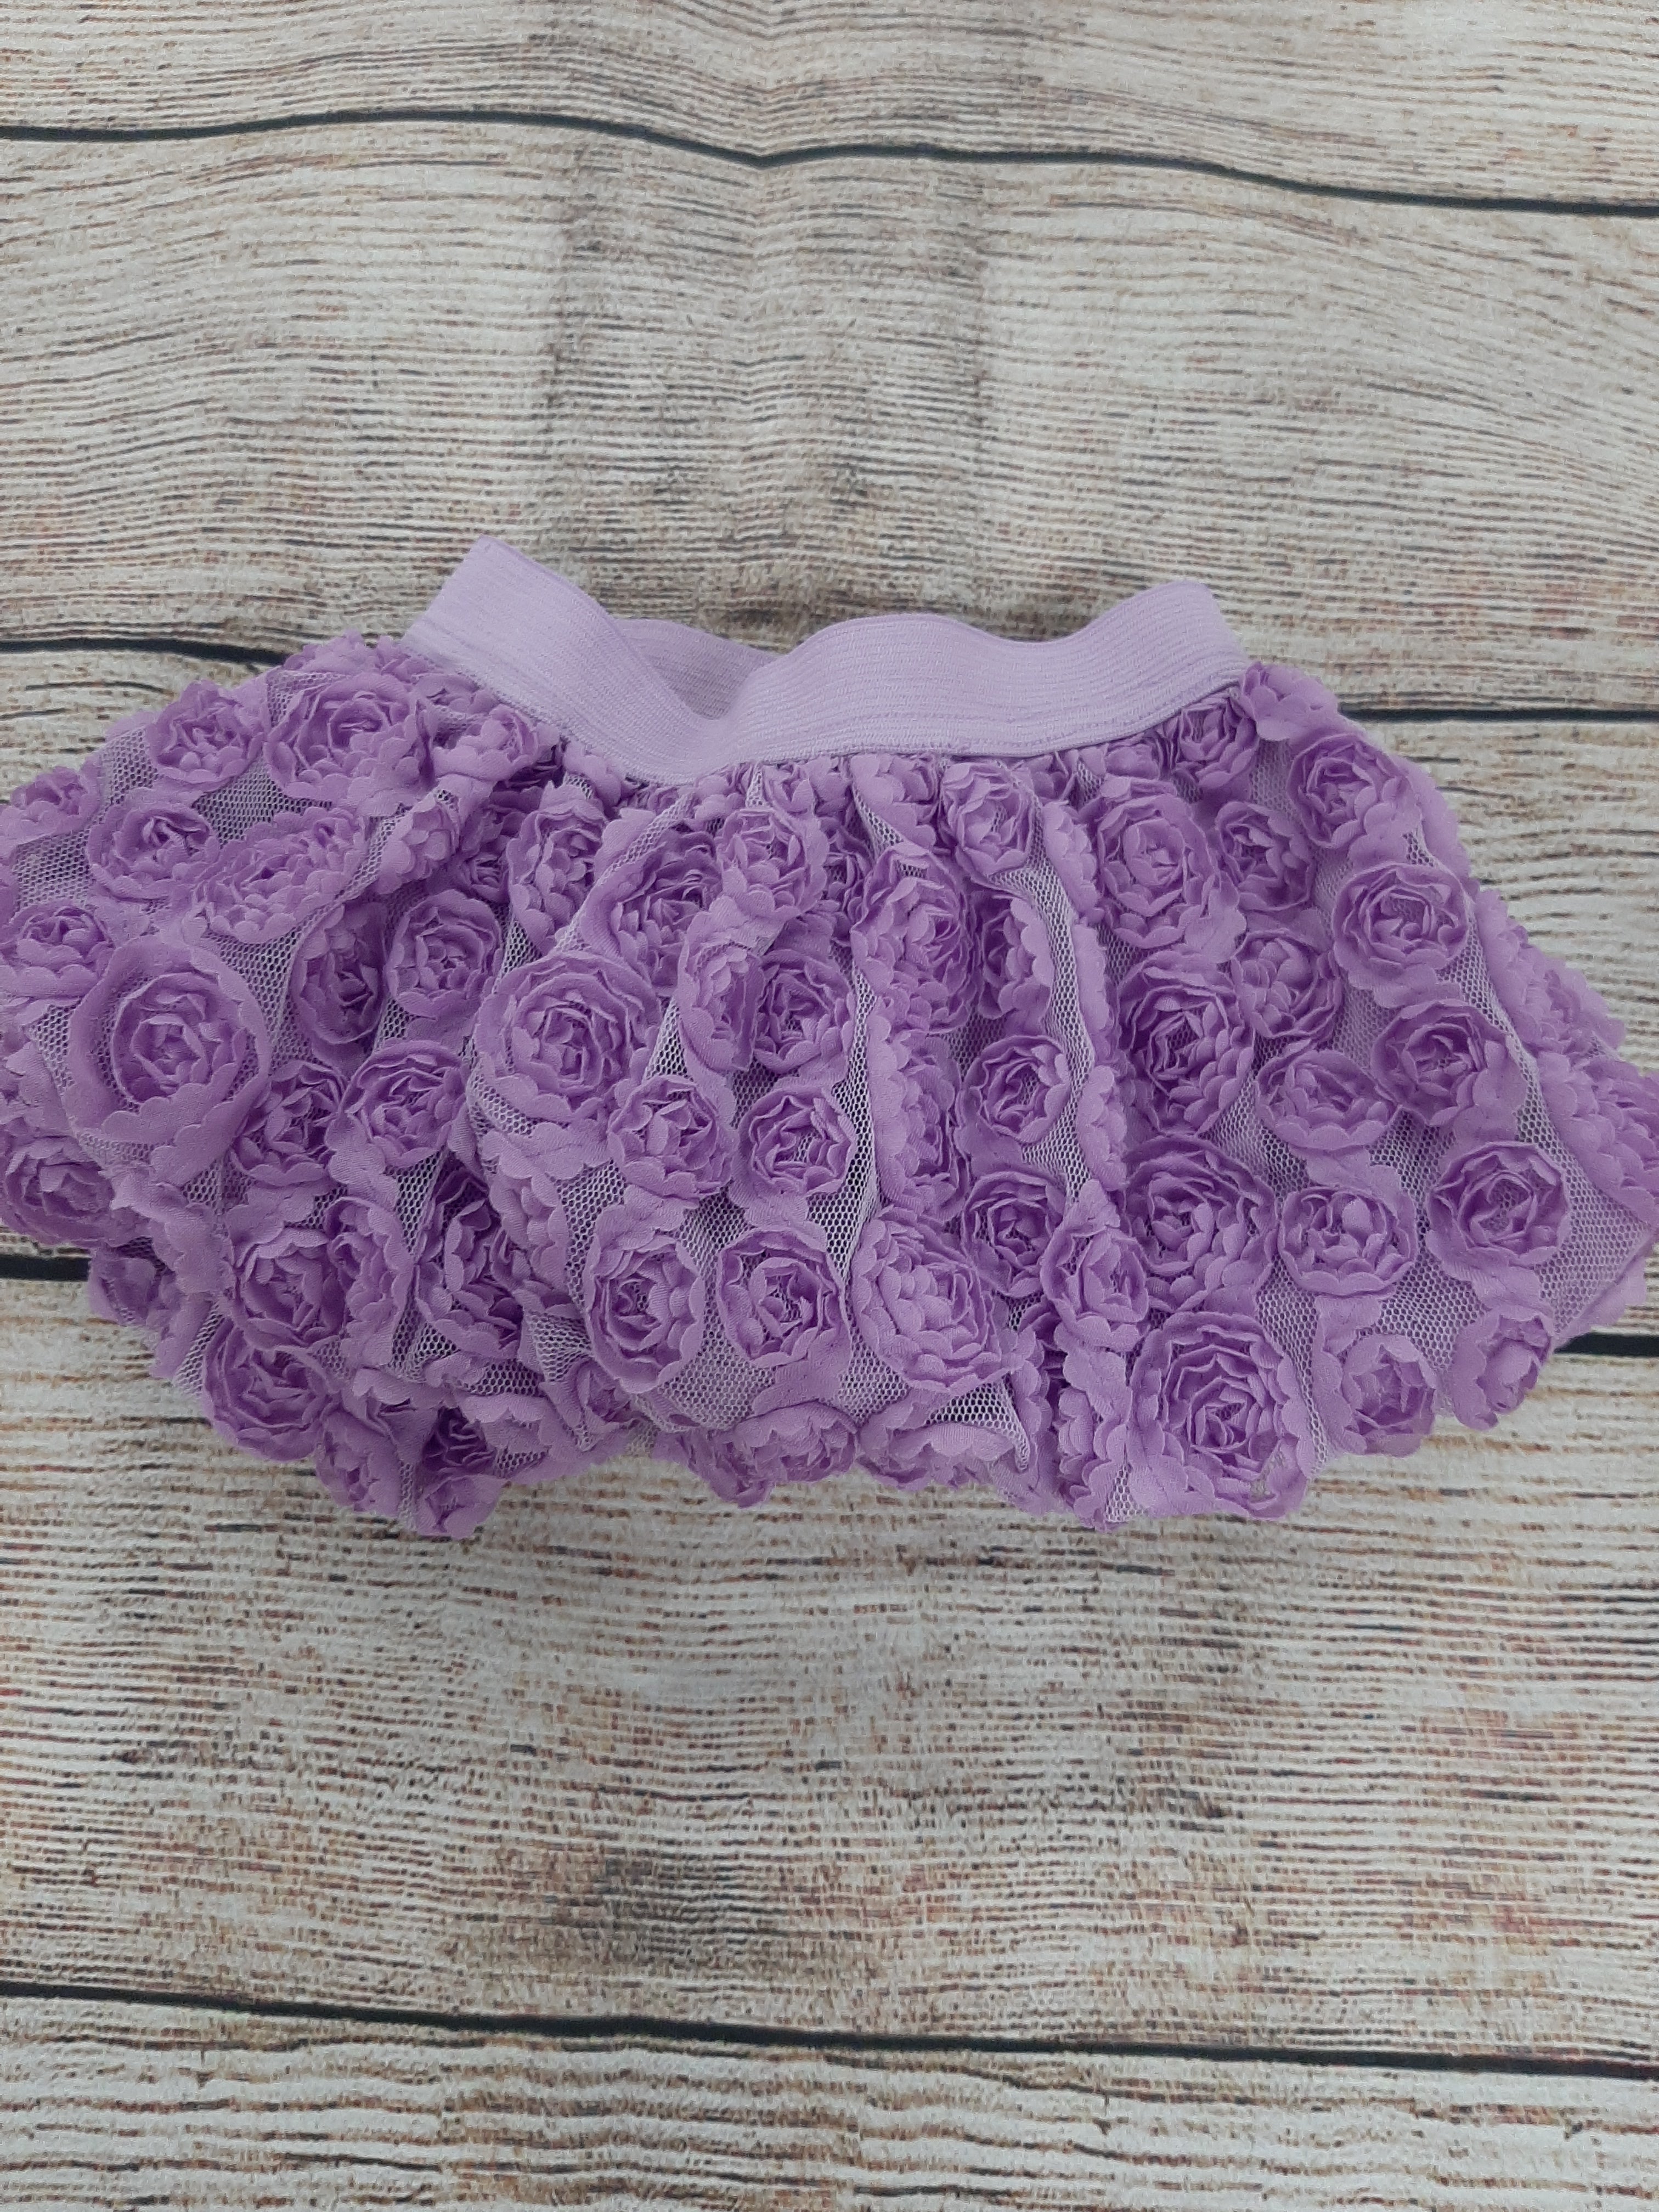 Girls new born Floral tutu skirt  Lilac purple that children's place The